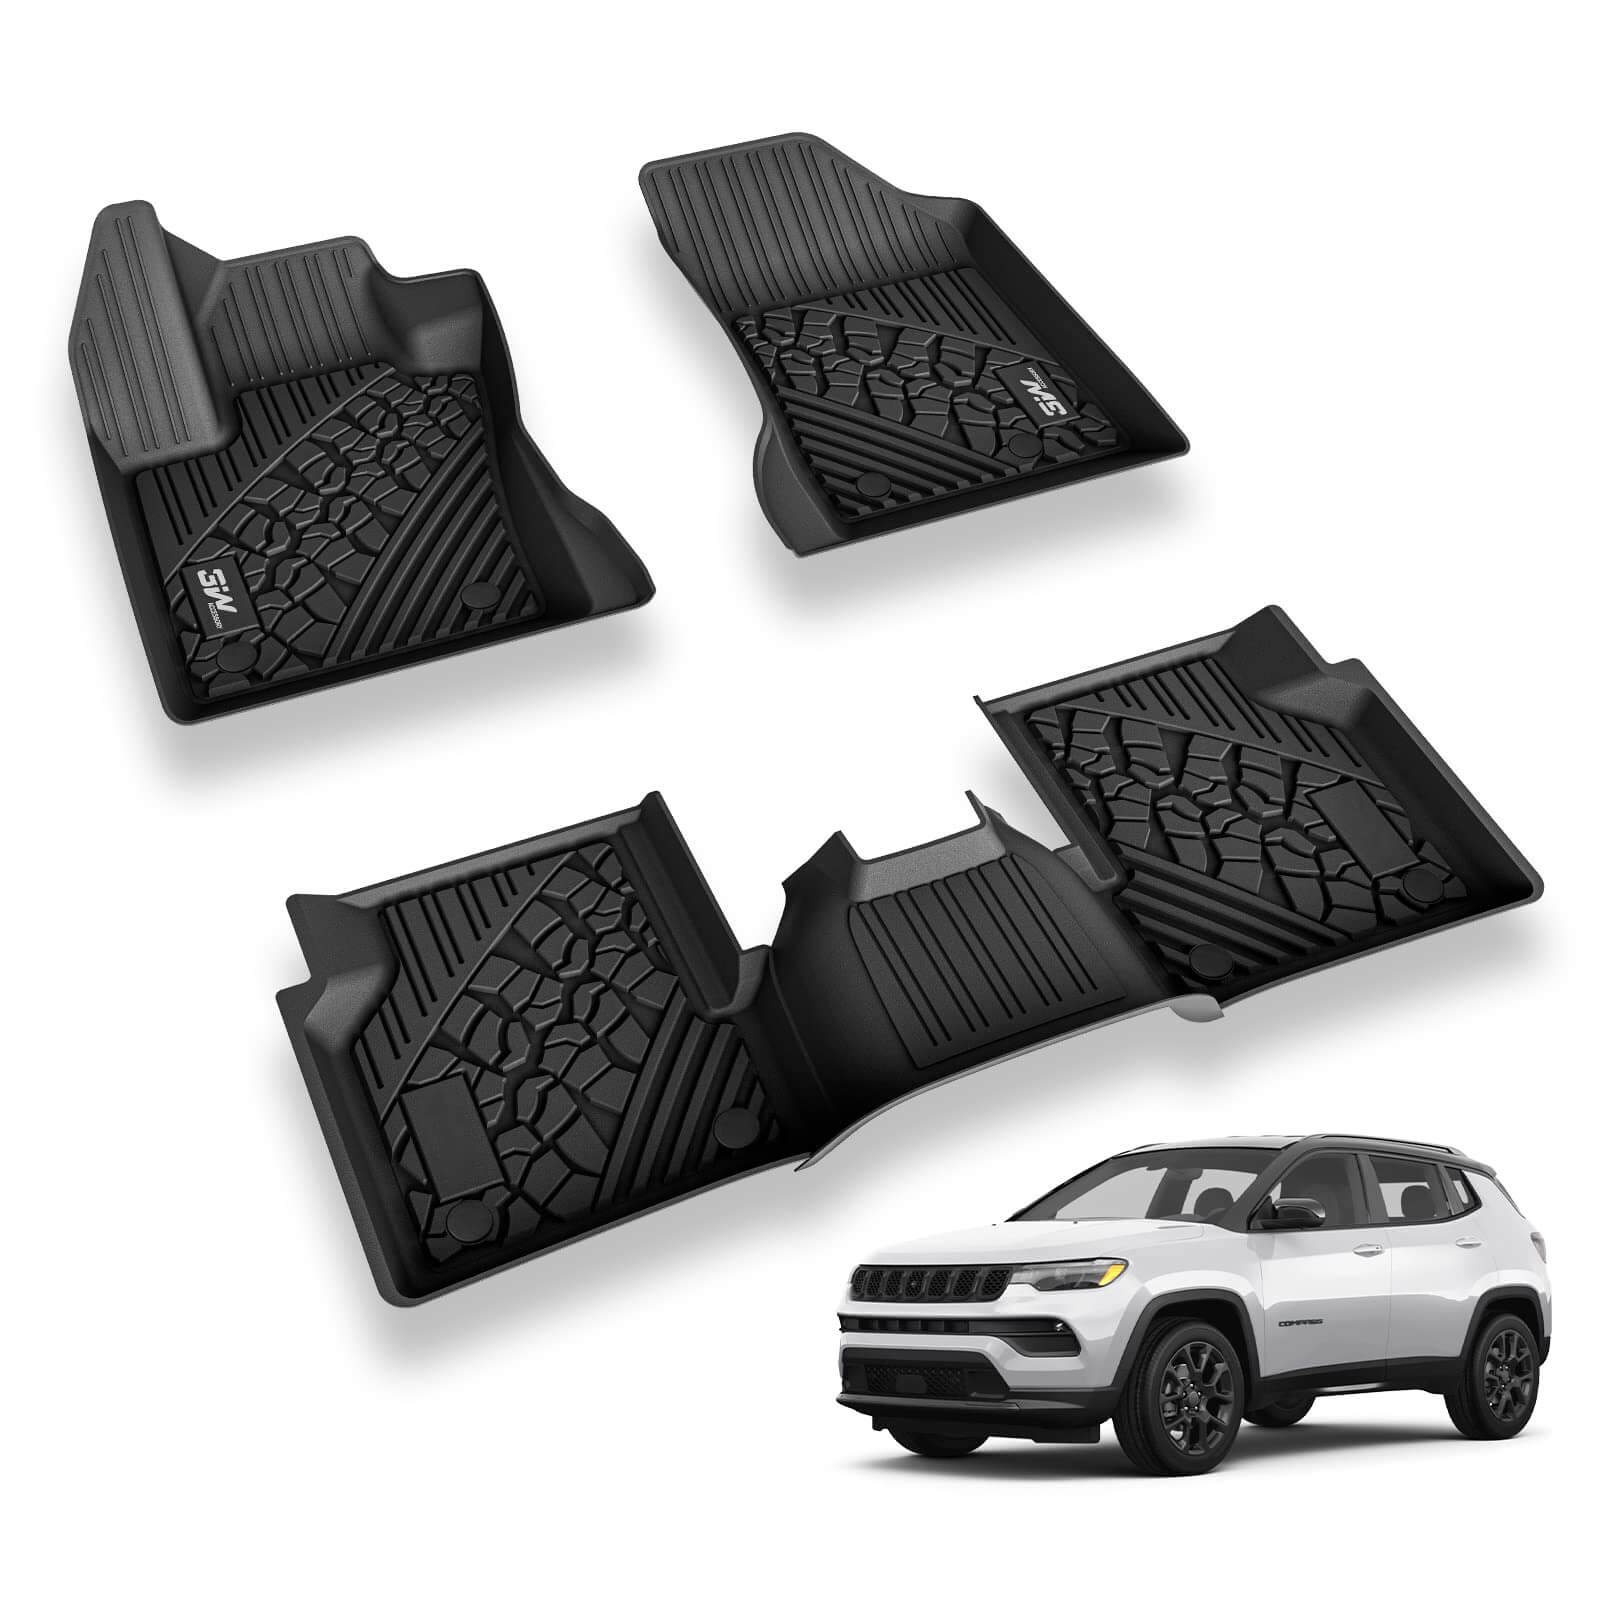 3W Jeep Compass 2017-2024 Custom Floor Mats TPE Material & All-Weather Protection Vehicles & Parts 3Wliners 2017-2024 Compass 2017-2024 1st&2nd Row Mats